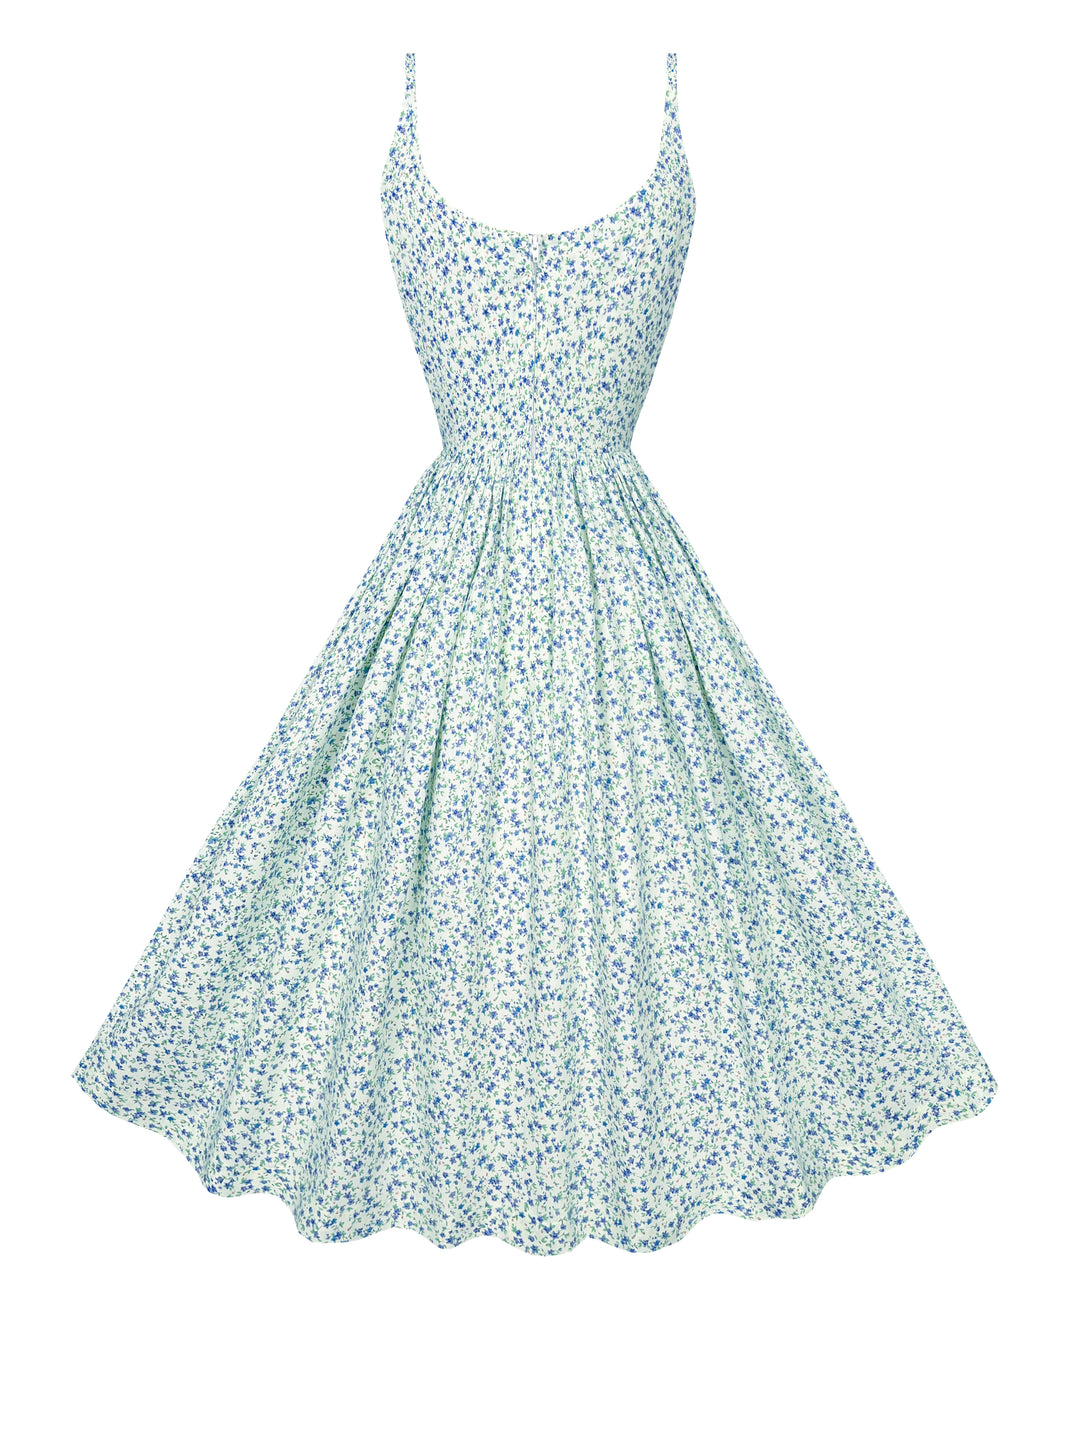 MTO - Penelope Dress "Mayfield Flowers" Floral Print